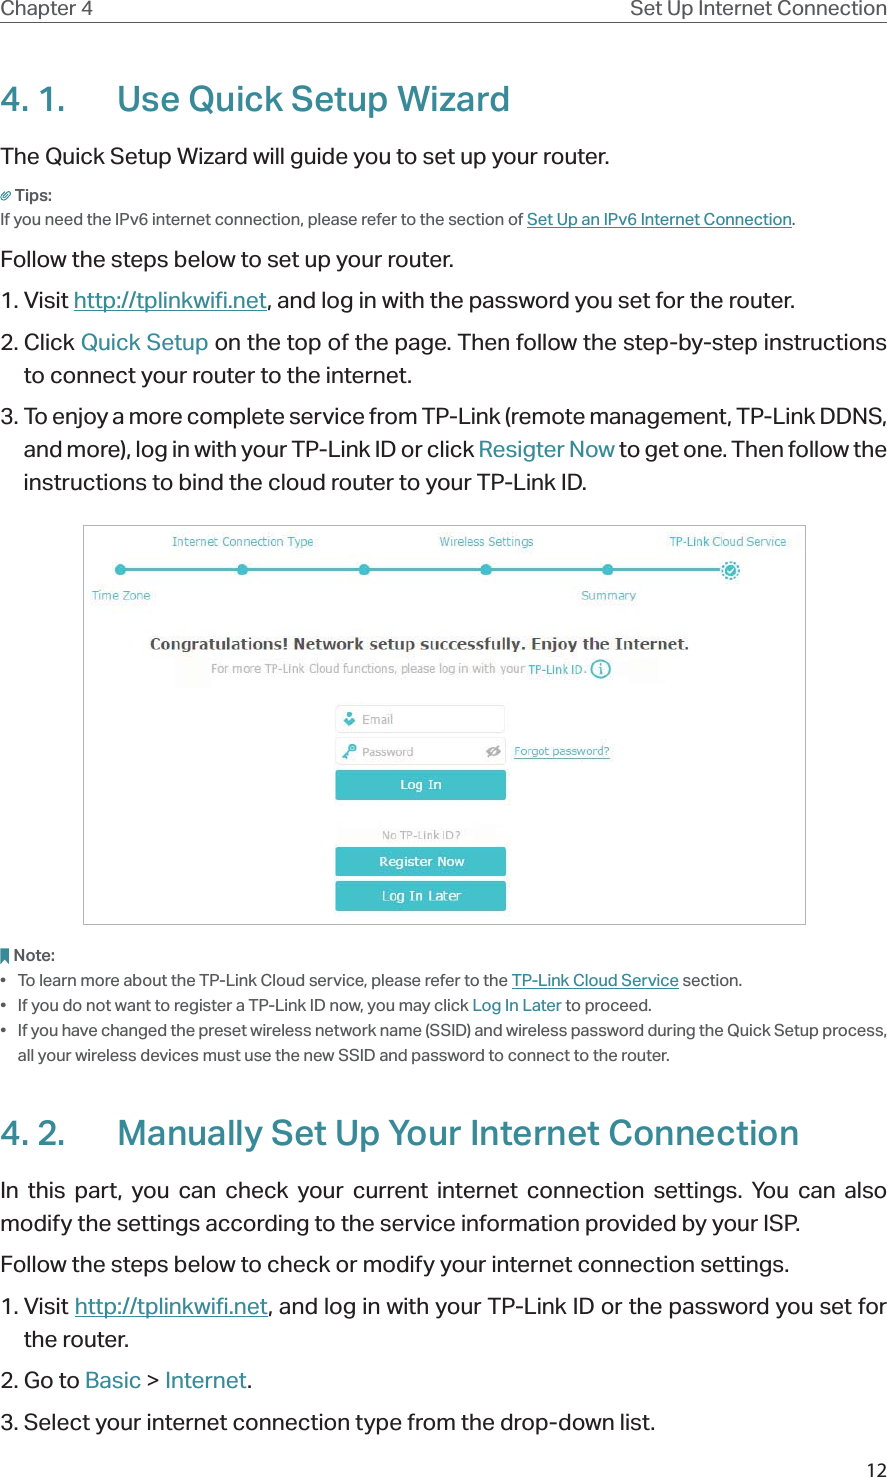 12Chapter 4 Set Up Internet Connection4. 1.  Use Quick Setup WizardThe Quick Setup Wizard will guide you to set up your router.Tips:If you need the IPv6 internet connection, please refer to the section of Set Up an IPv6 Internet Connection.Follow the steps below to set up your router.1. Visit http://tplinkwifi.net, and log in with the password you set for the router.2. Click Quick Setup on the top of the page. Then follow the step-by-step instructions to connect your router to the internet.3. To enjoy a more complete service from TP-Link (remote management, TP-Link DDNS, and more), log in with your TP-Link ID or click Resigter Now to get one. Then follow the instructions to bind the cloud router to your TP-Link ID.Note:•  To learn more about the TP-Link Cloud service, please refer to the TP-Link Cloud Service section.•  If you do not want to register a TP-Link ID now, you may click Log In Later to proceed.•  If you have changed the preset wireless network name (SSID) and wireless password during the Quick Setup process, all your wireless devices must use the new SSID and password to connect to the router.4. 2.  Manually Set Up Your Internet Connection In this part, you can check your current internet connection settings. You can also modify the settings according to the service information provided by your ISP.Follow the steps below to check or modify your internet connection settings.1. Visit http://tplinkwifi.net, and log in with your TP-Link ID or the password you set for the router.2. Go to Basic &gt; Internet.3. Select your internet connection type from the drop-down list. 